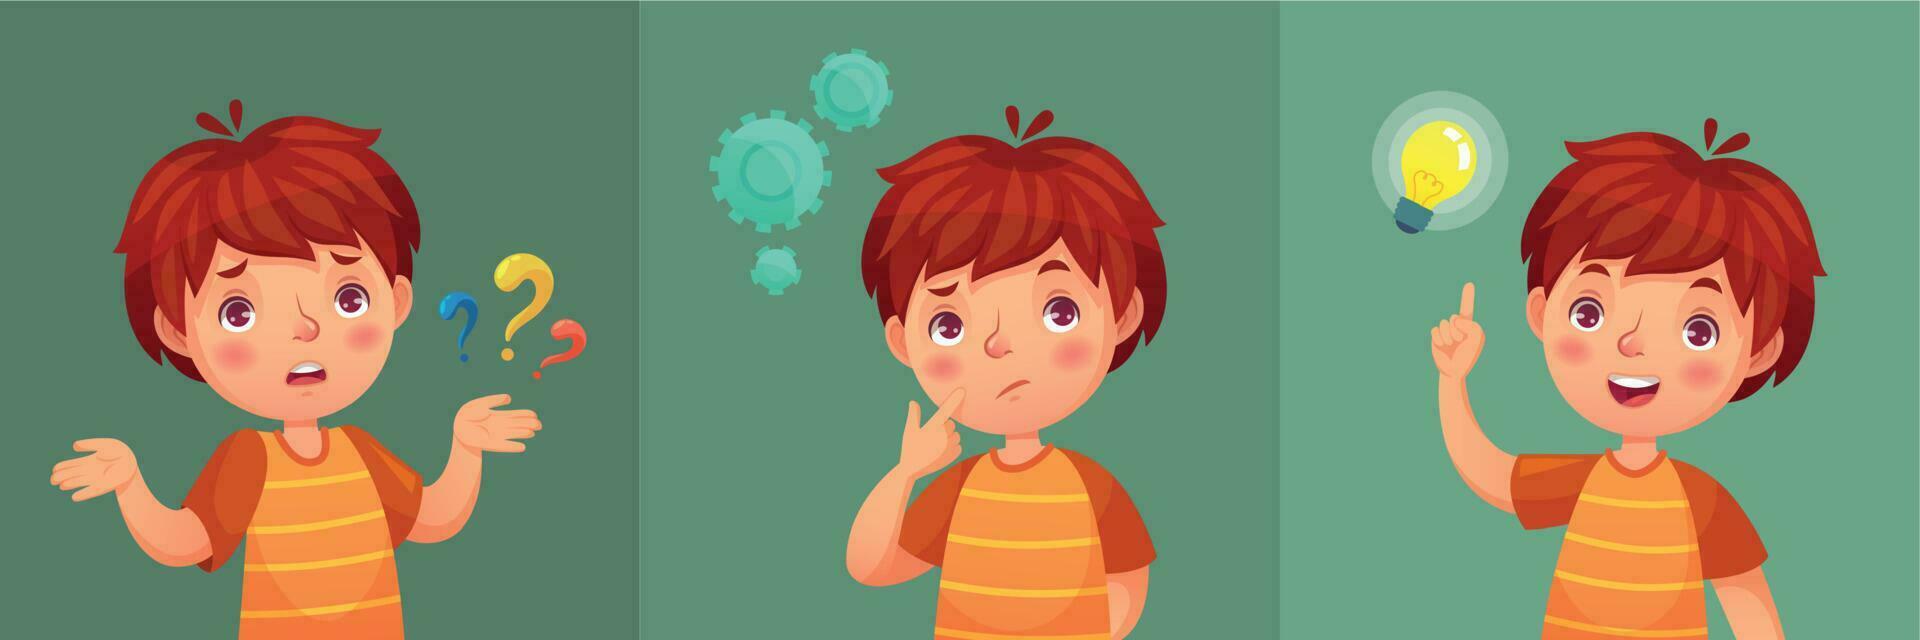 Child question. Thoughtful young boy ask question, confused kid and understand or found answer cartoon vector portrait illustration